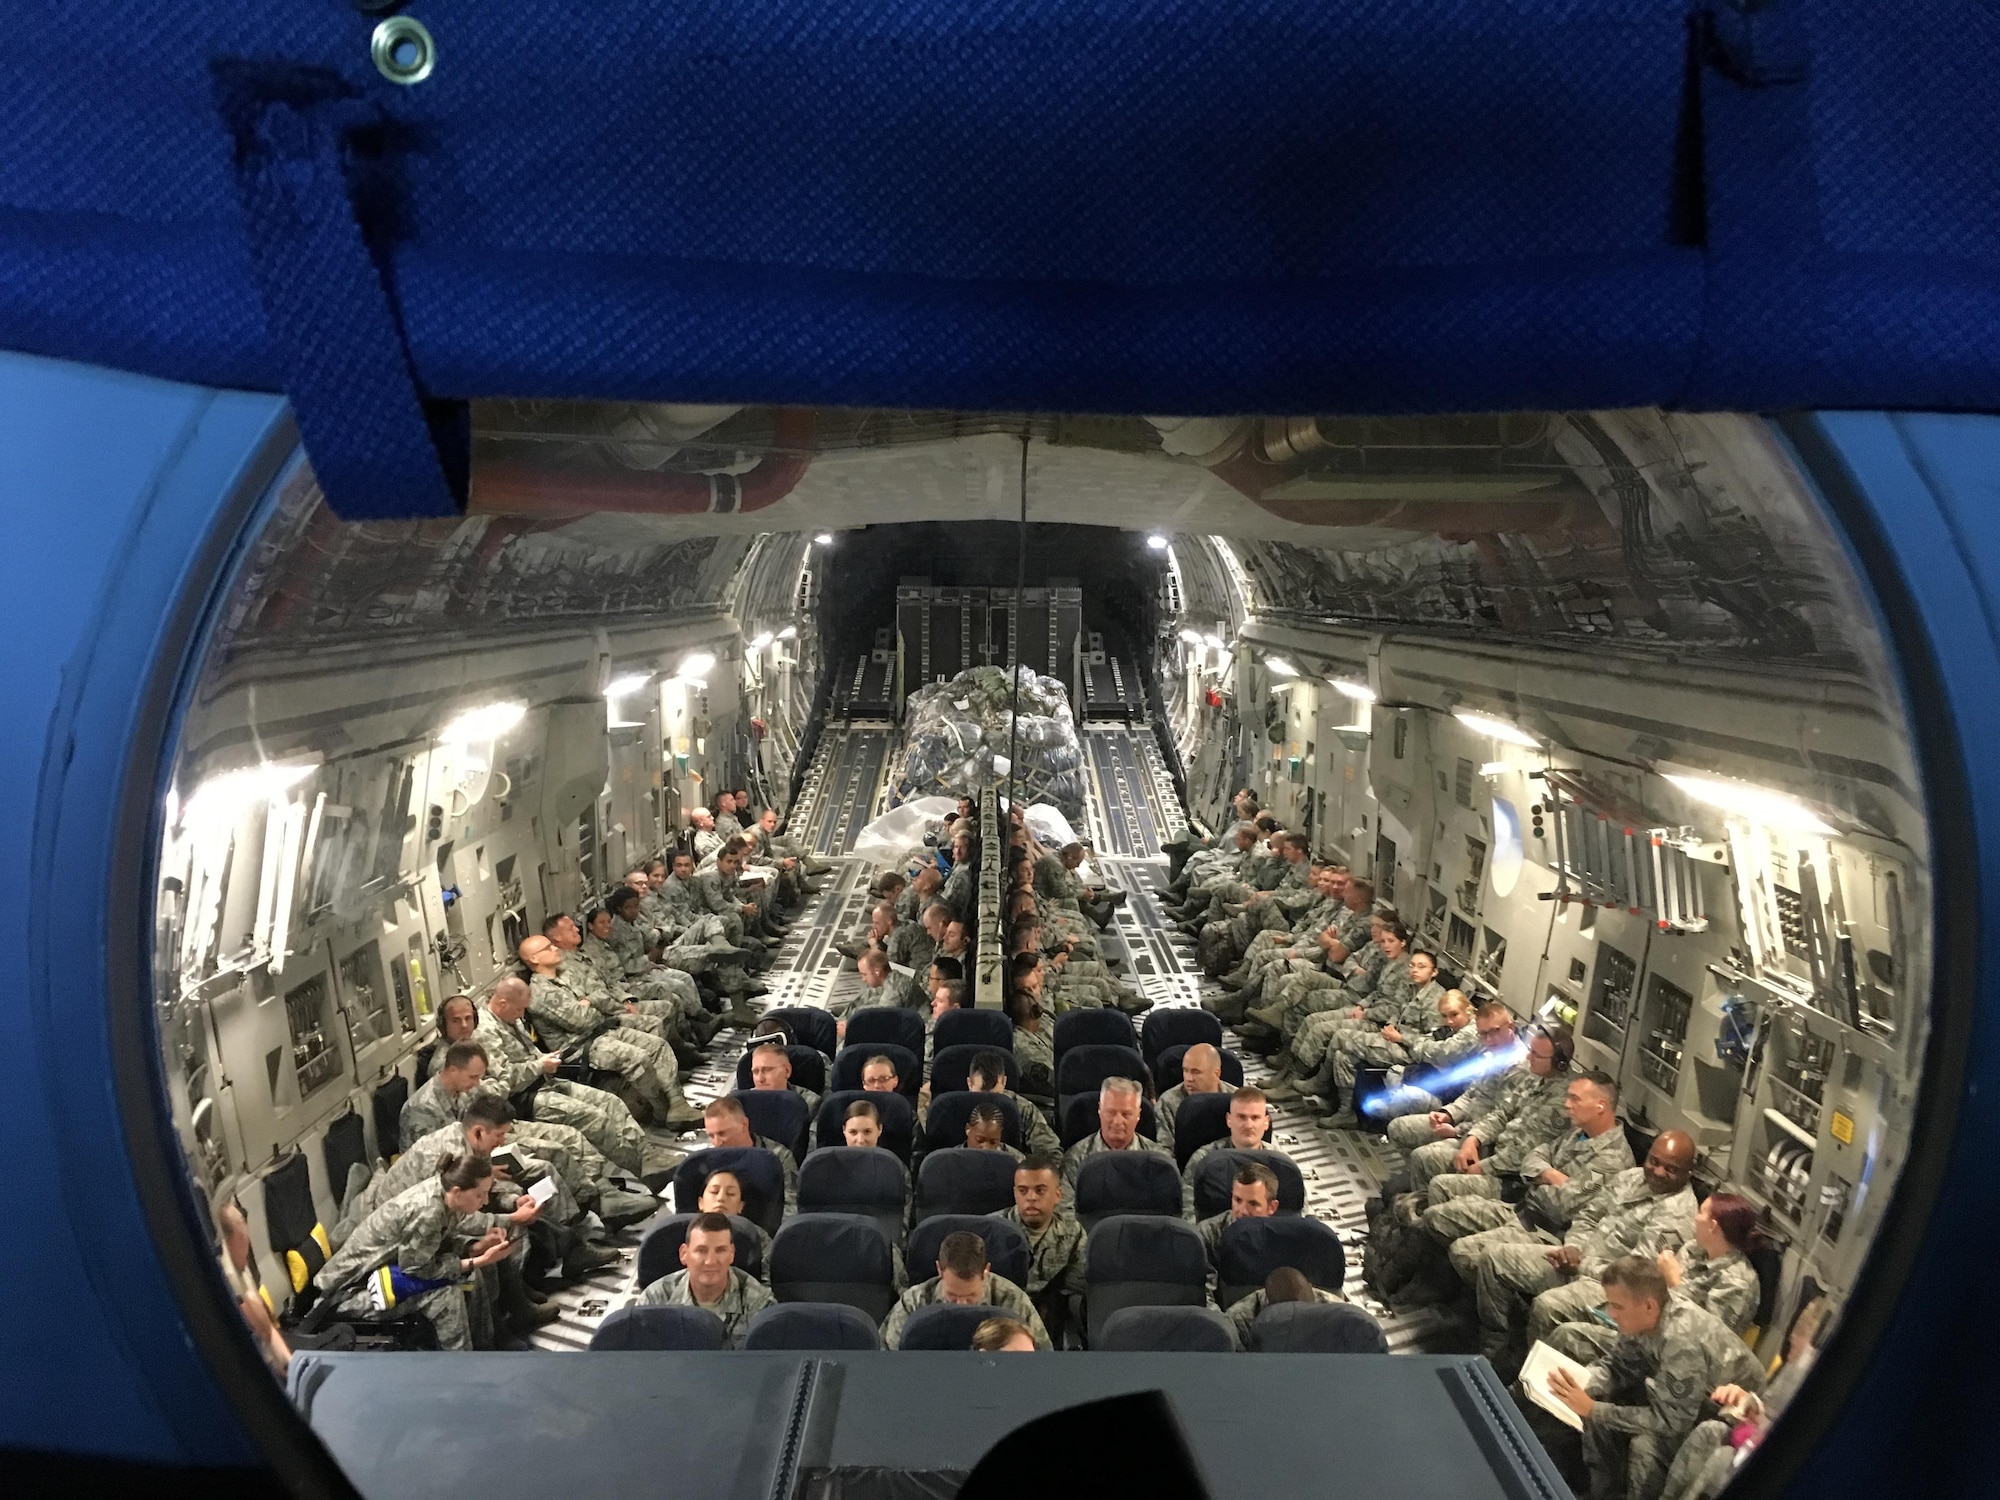 About a hundred 419th Fighter Wing reservists sit aboard a C-17 aircraft as it prepares to land at Joint Base Pearl Harbor-Hickam, Hawaii, where the Citizen Airmen completed two weeks of annual tour training.